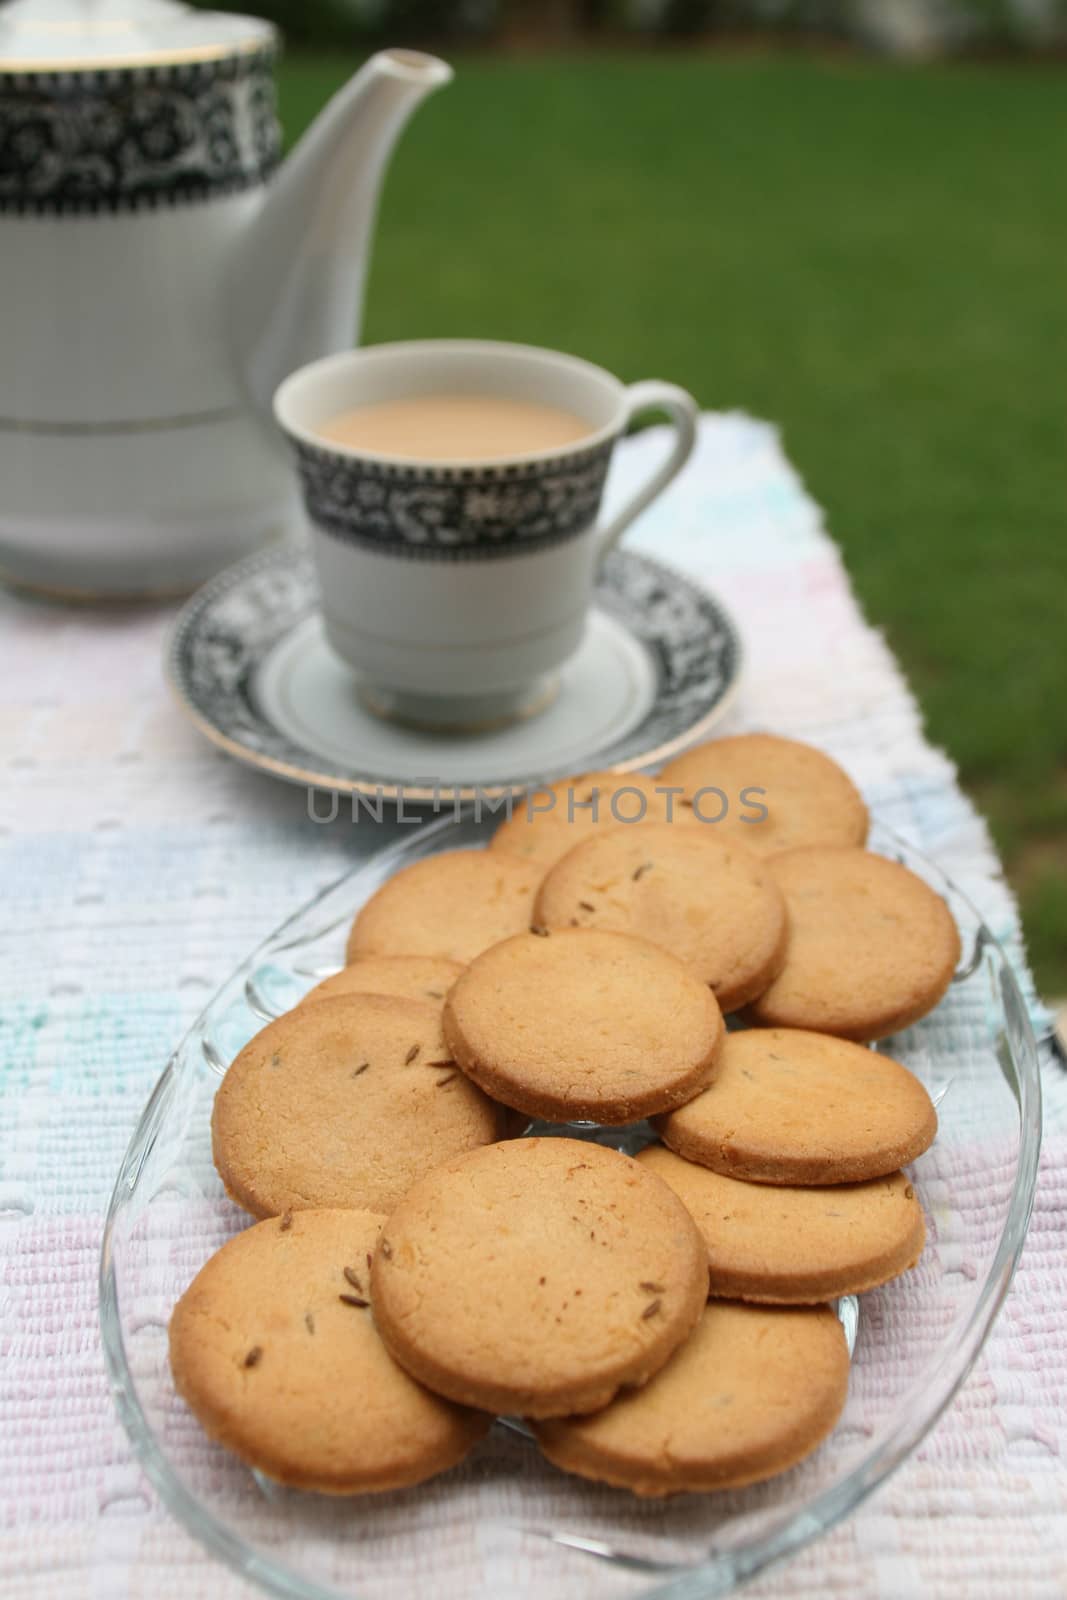 Tray full of biscuits served with tea pot and a cup by haiderazim